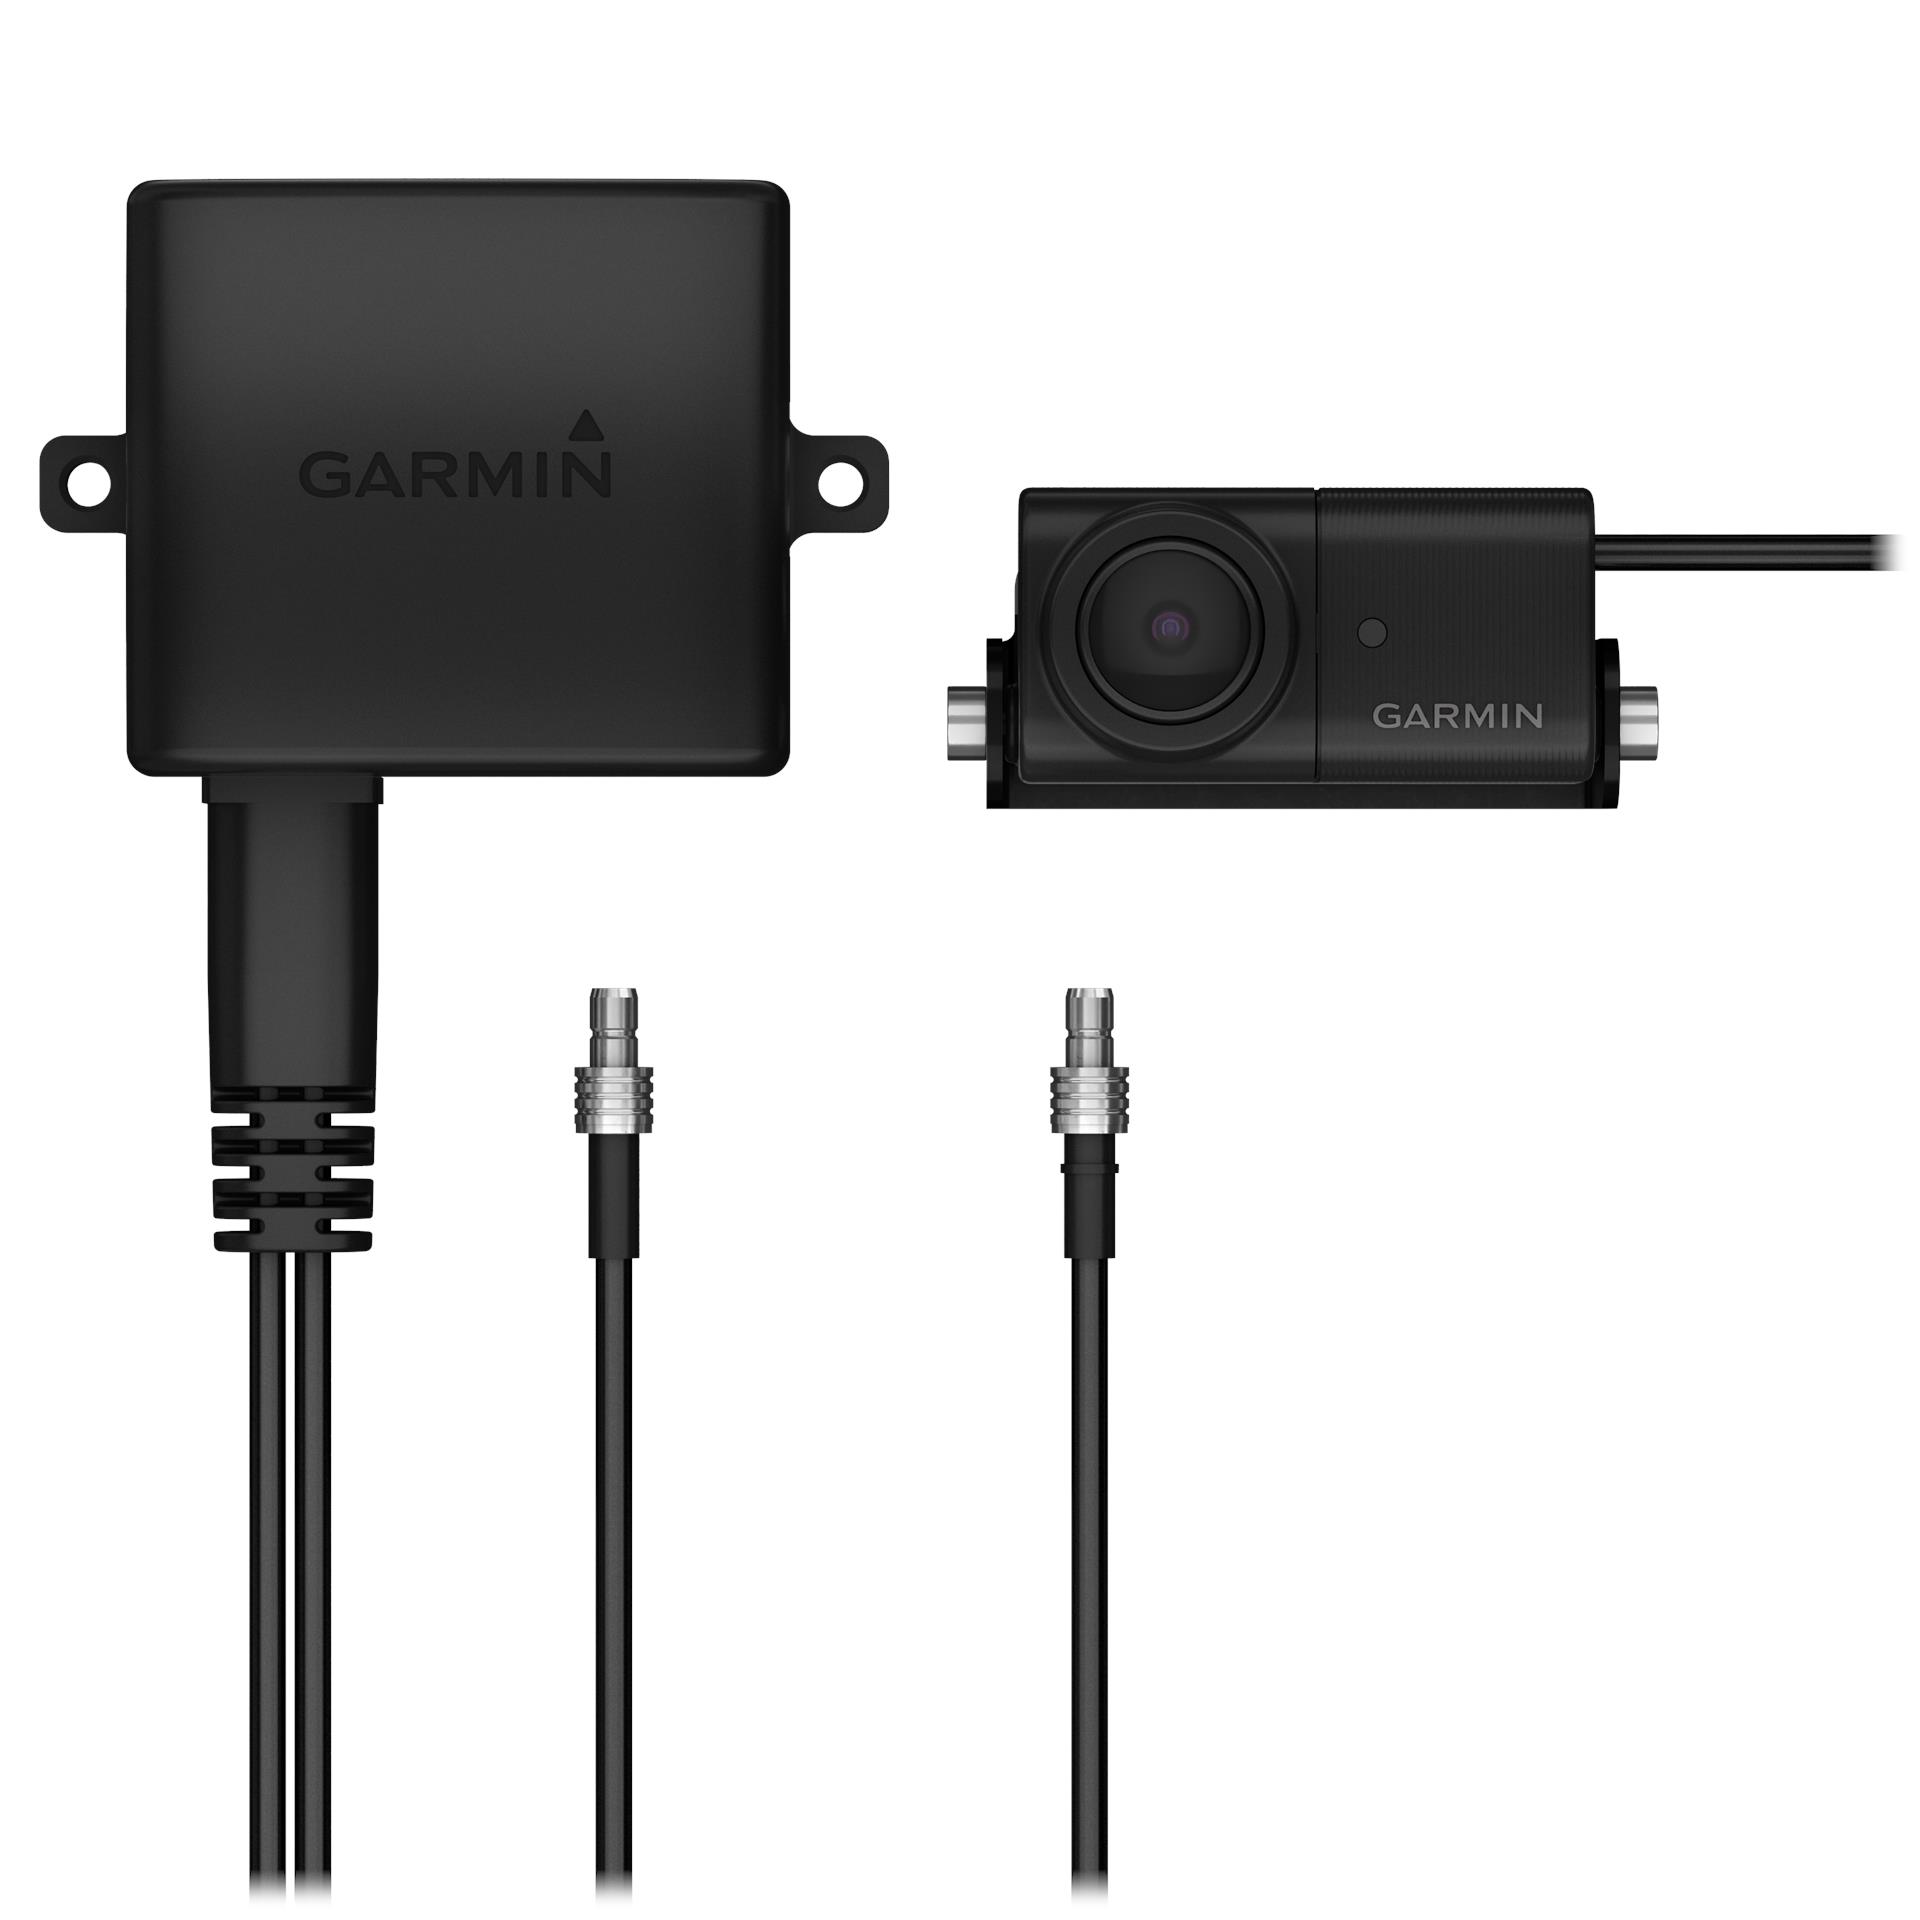 Garmin BC 50 Wireless Backup Camera with Night Vision, with License Plate Mount and Bracket Mount